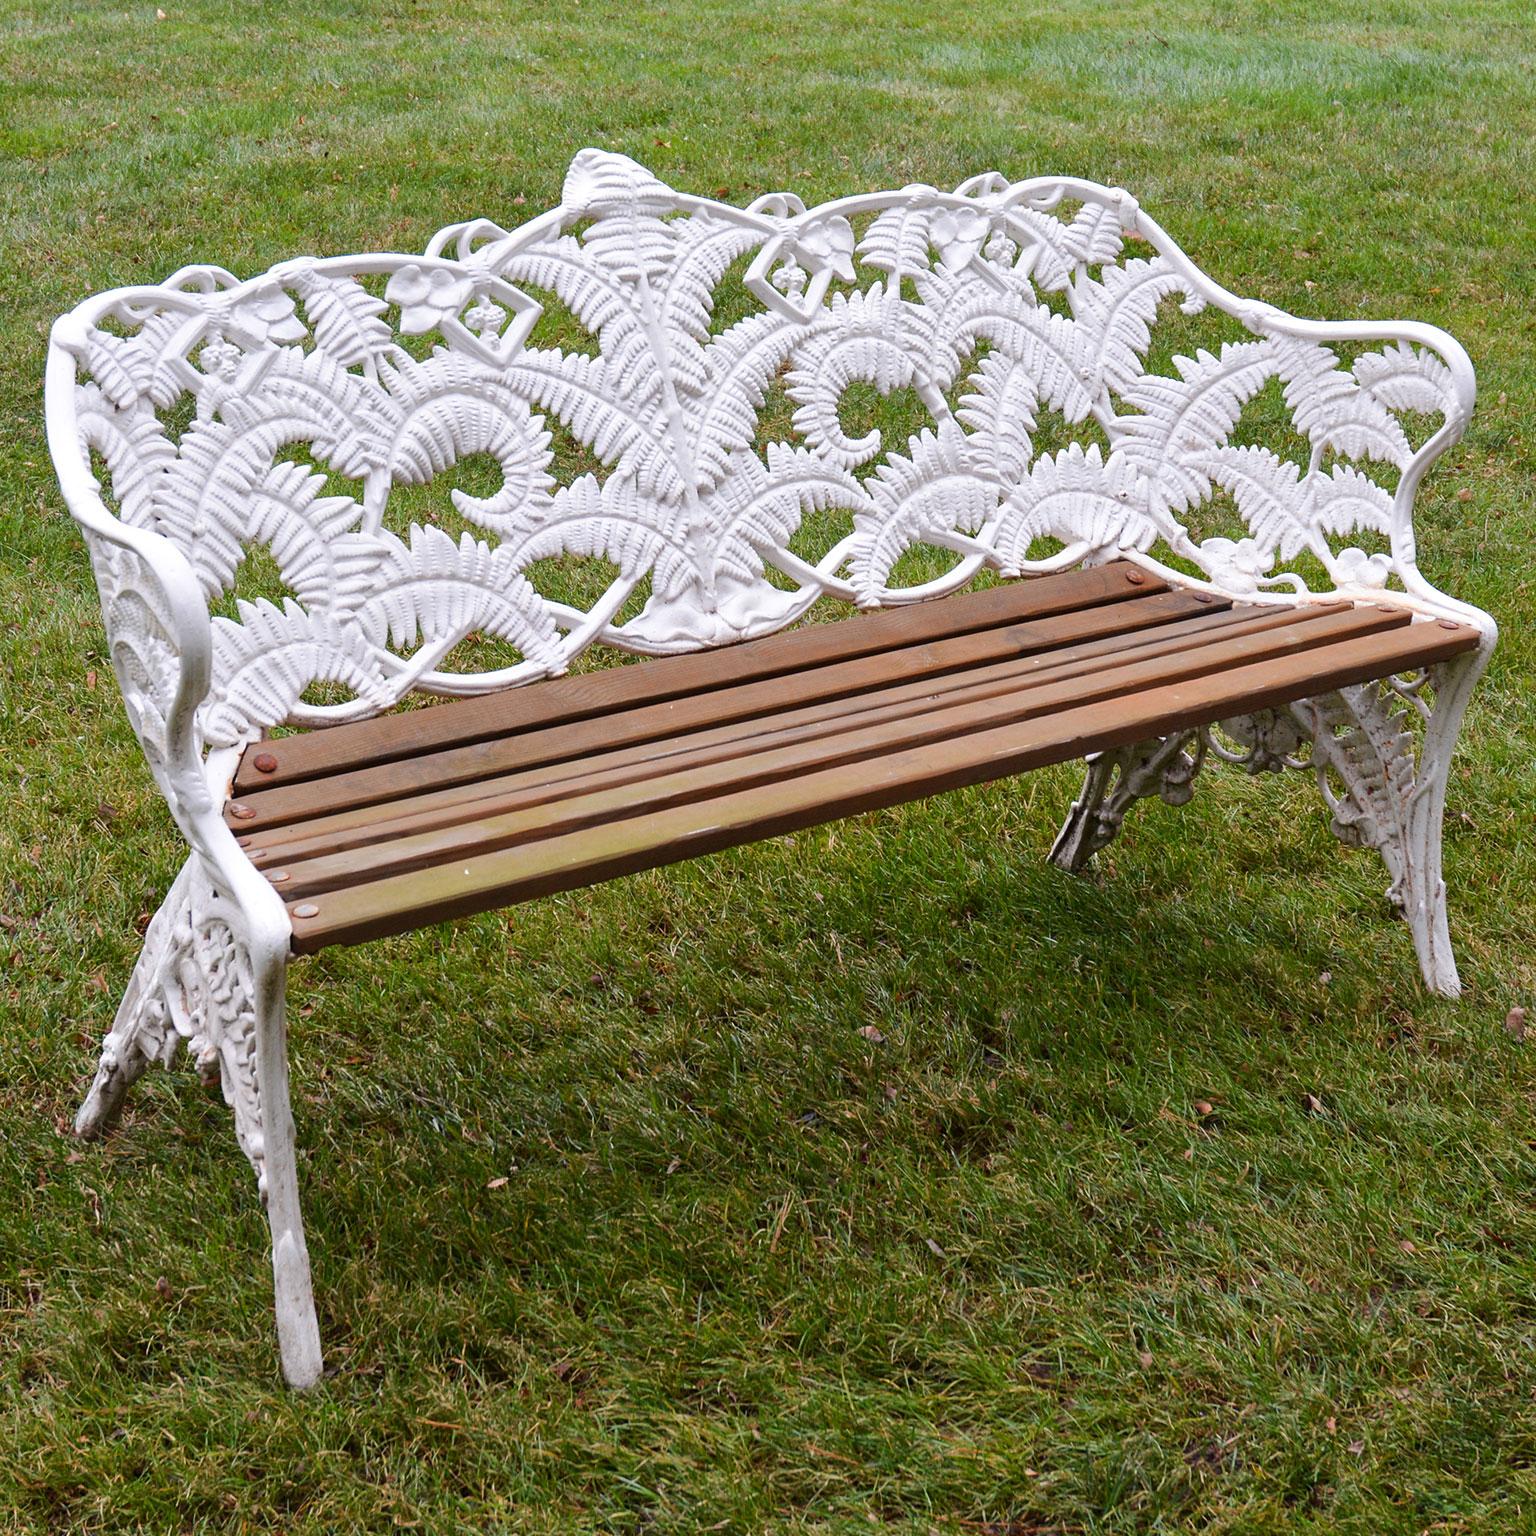 A cast-iron and wood settee in the Fern and Blackberry pattern, marked “CB DALE Co” and with British registration mark by the Coalbrookdale Company, English, circa 1875 (wood slats replaced). 

The design for this garden seat was listed as pattern